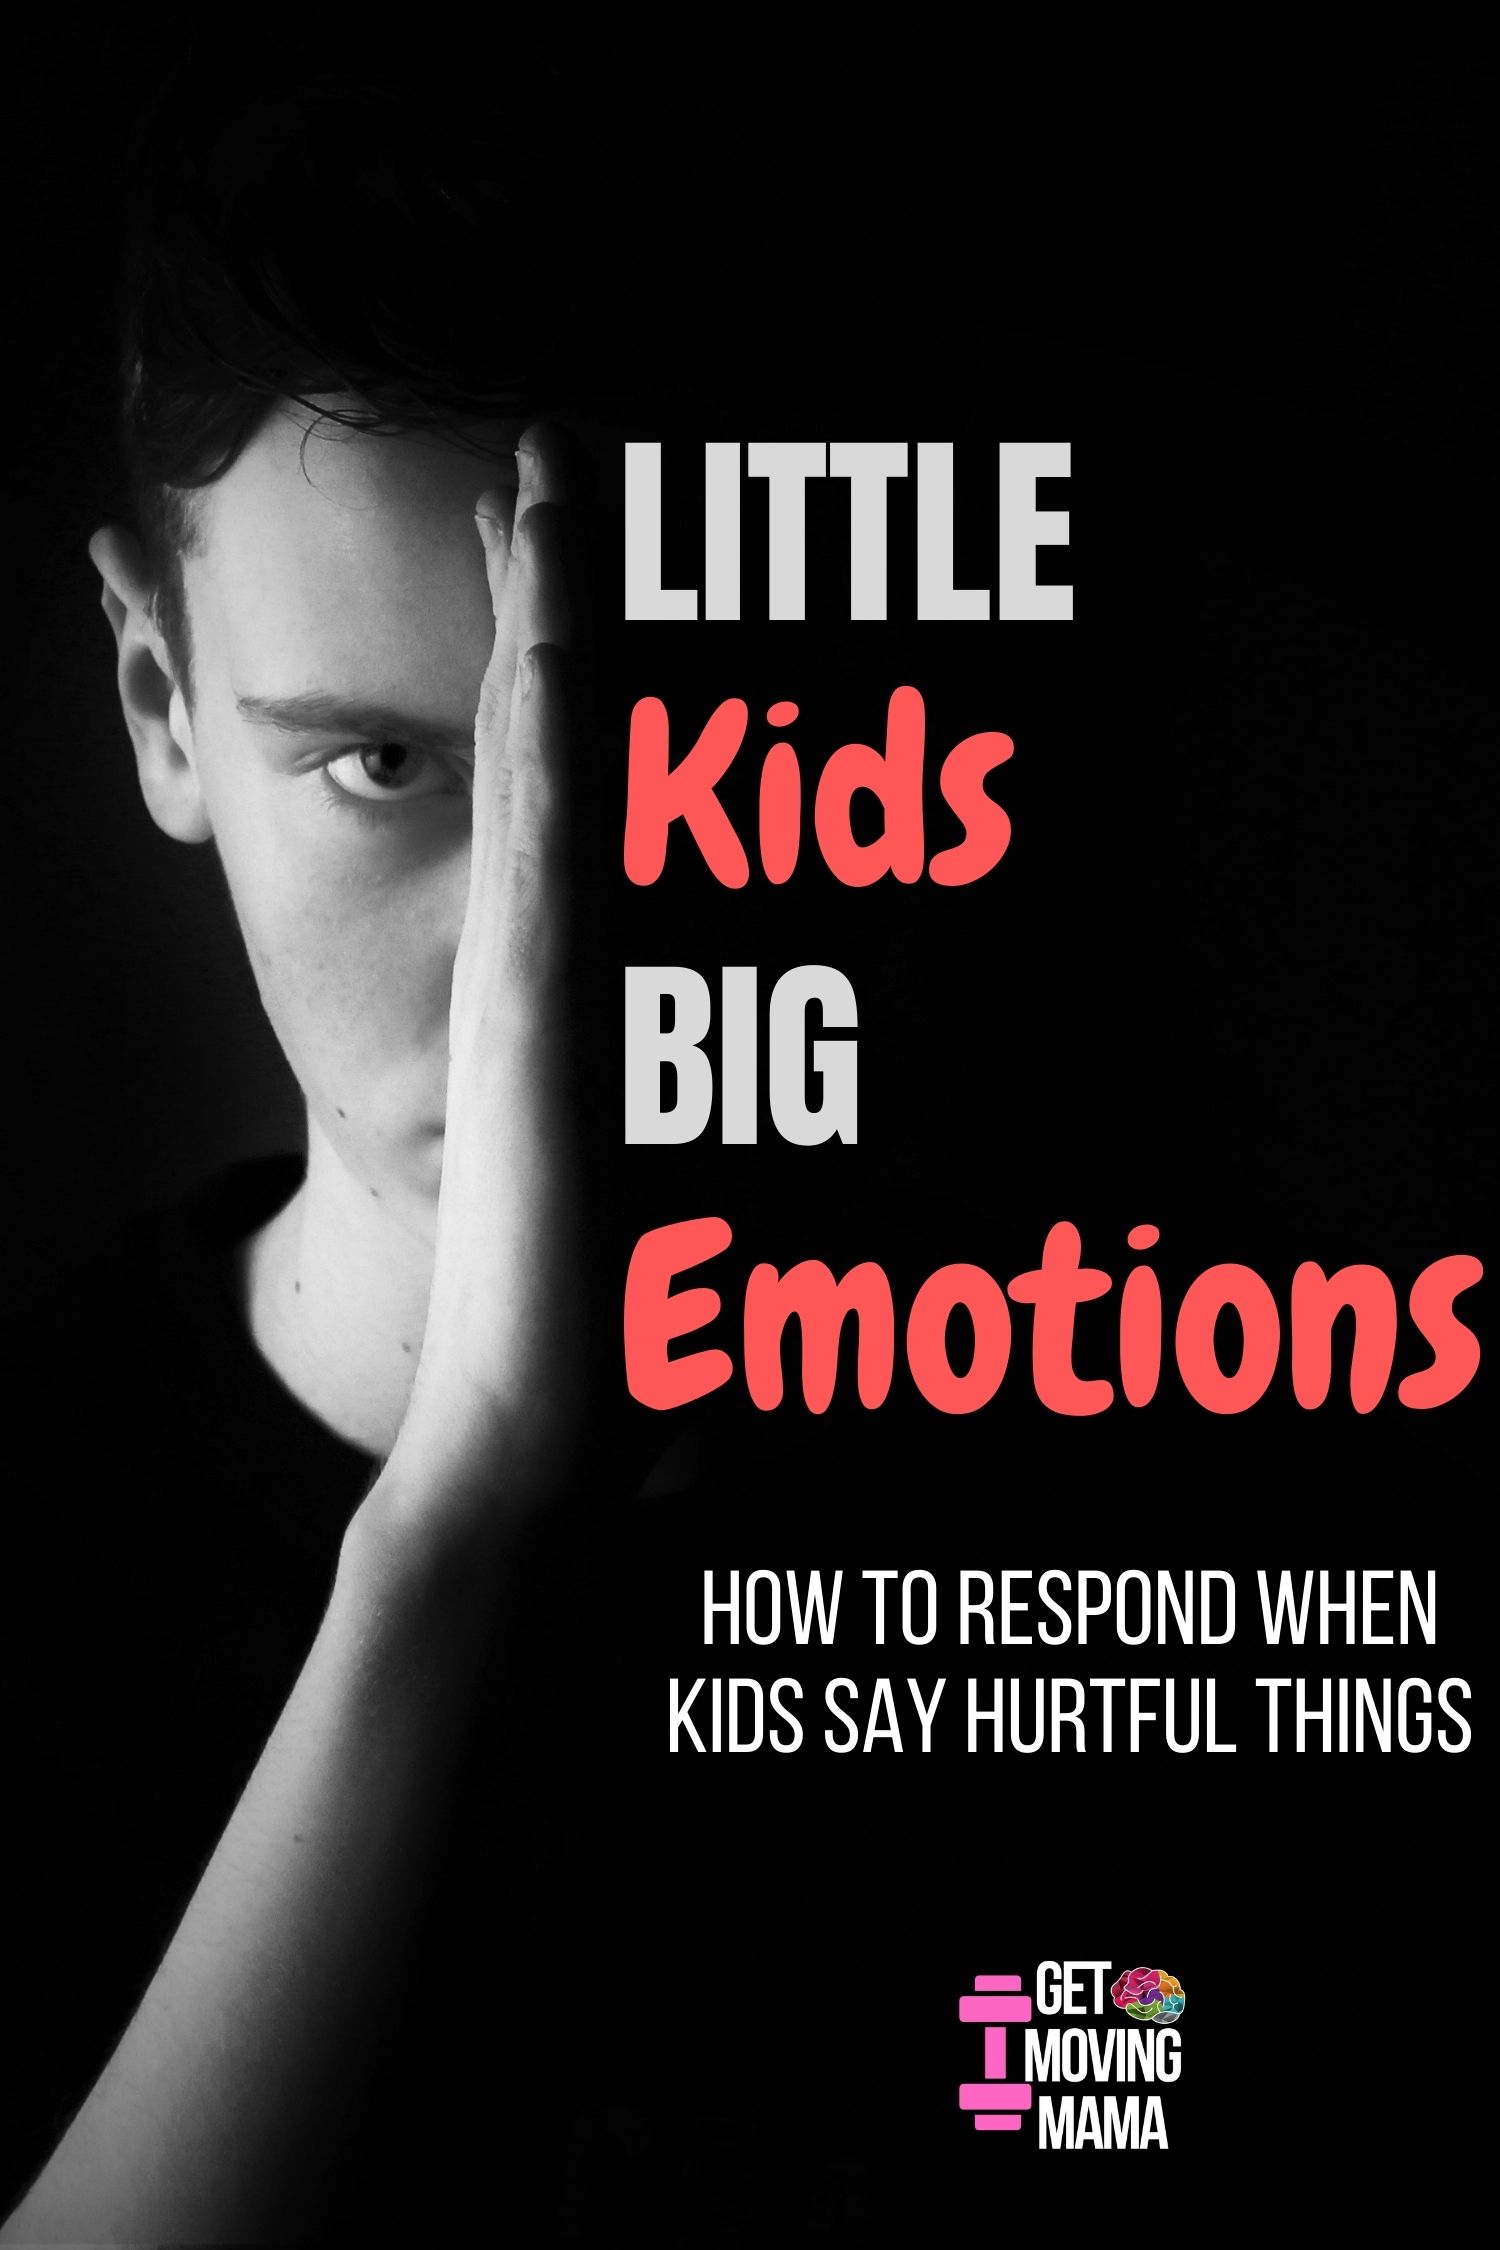 A picture of a kid with his hand sideways in anger with text that says "little kids big emotions how to respond when kids say hurtful things" on the side.